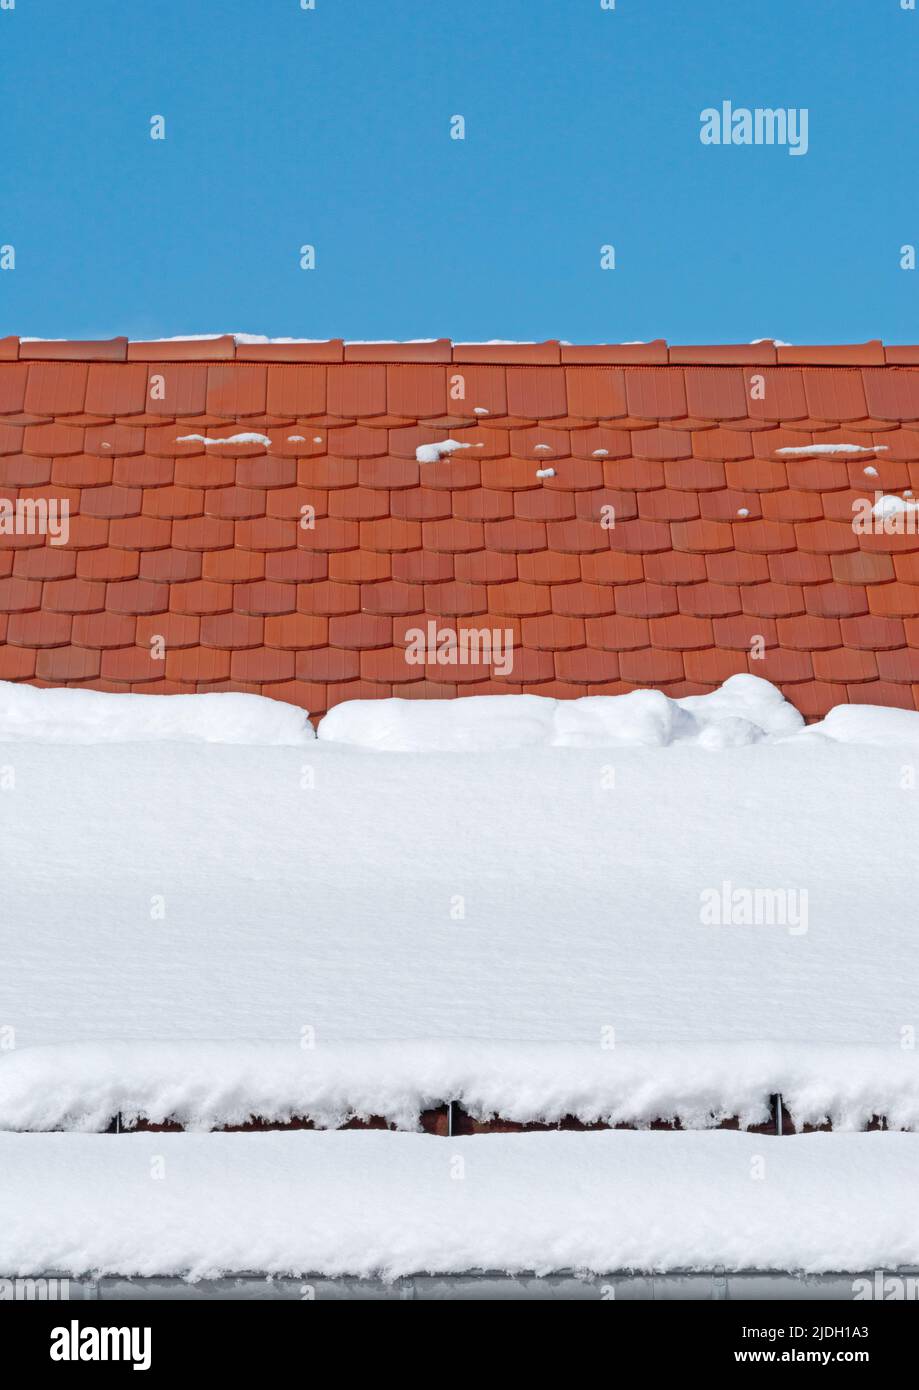 Roof with melting snow, portrait format Stock Photo